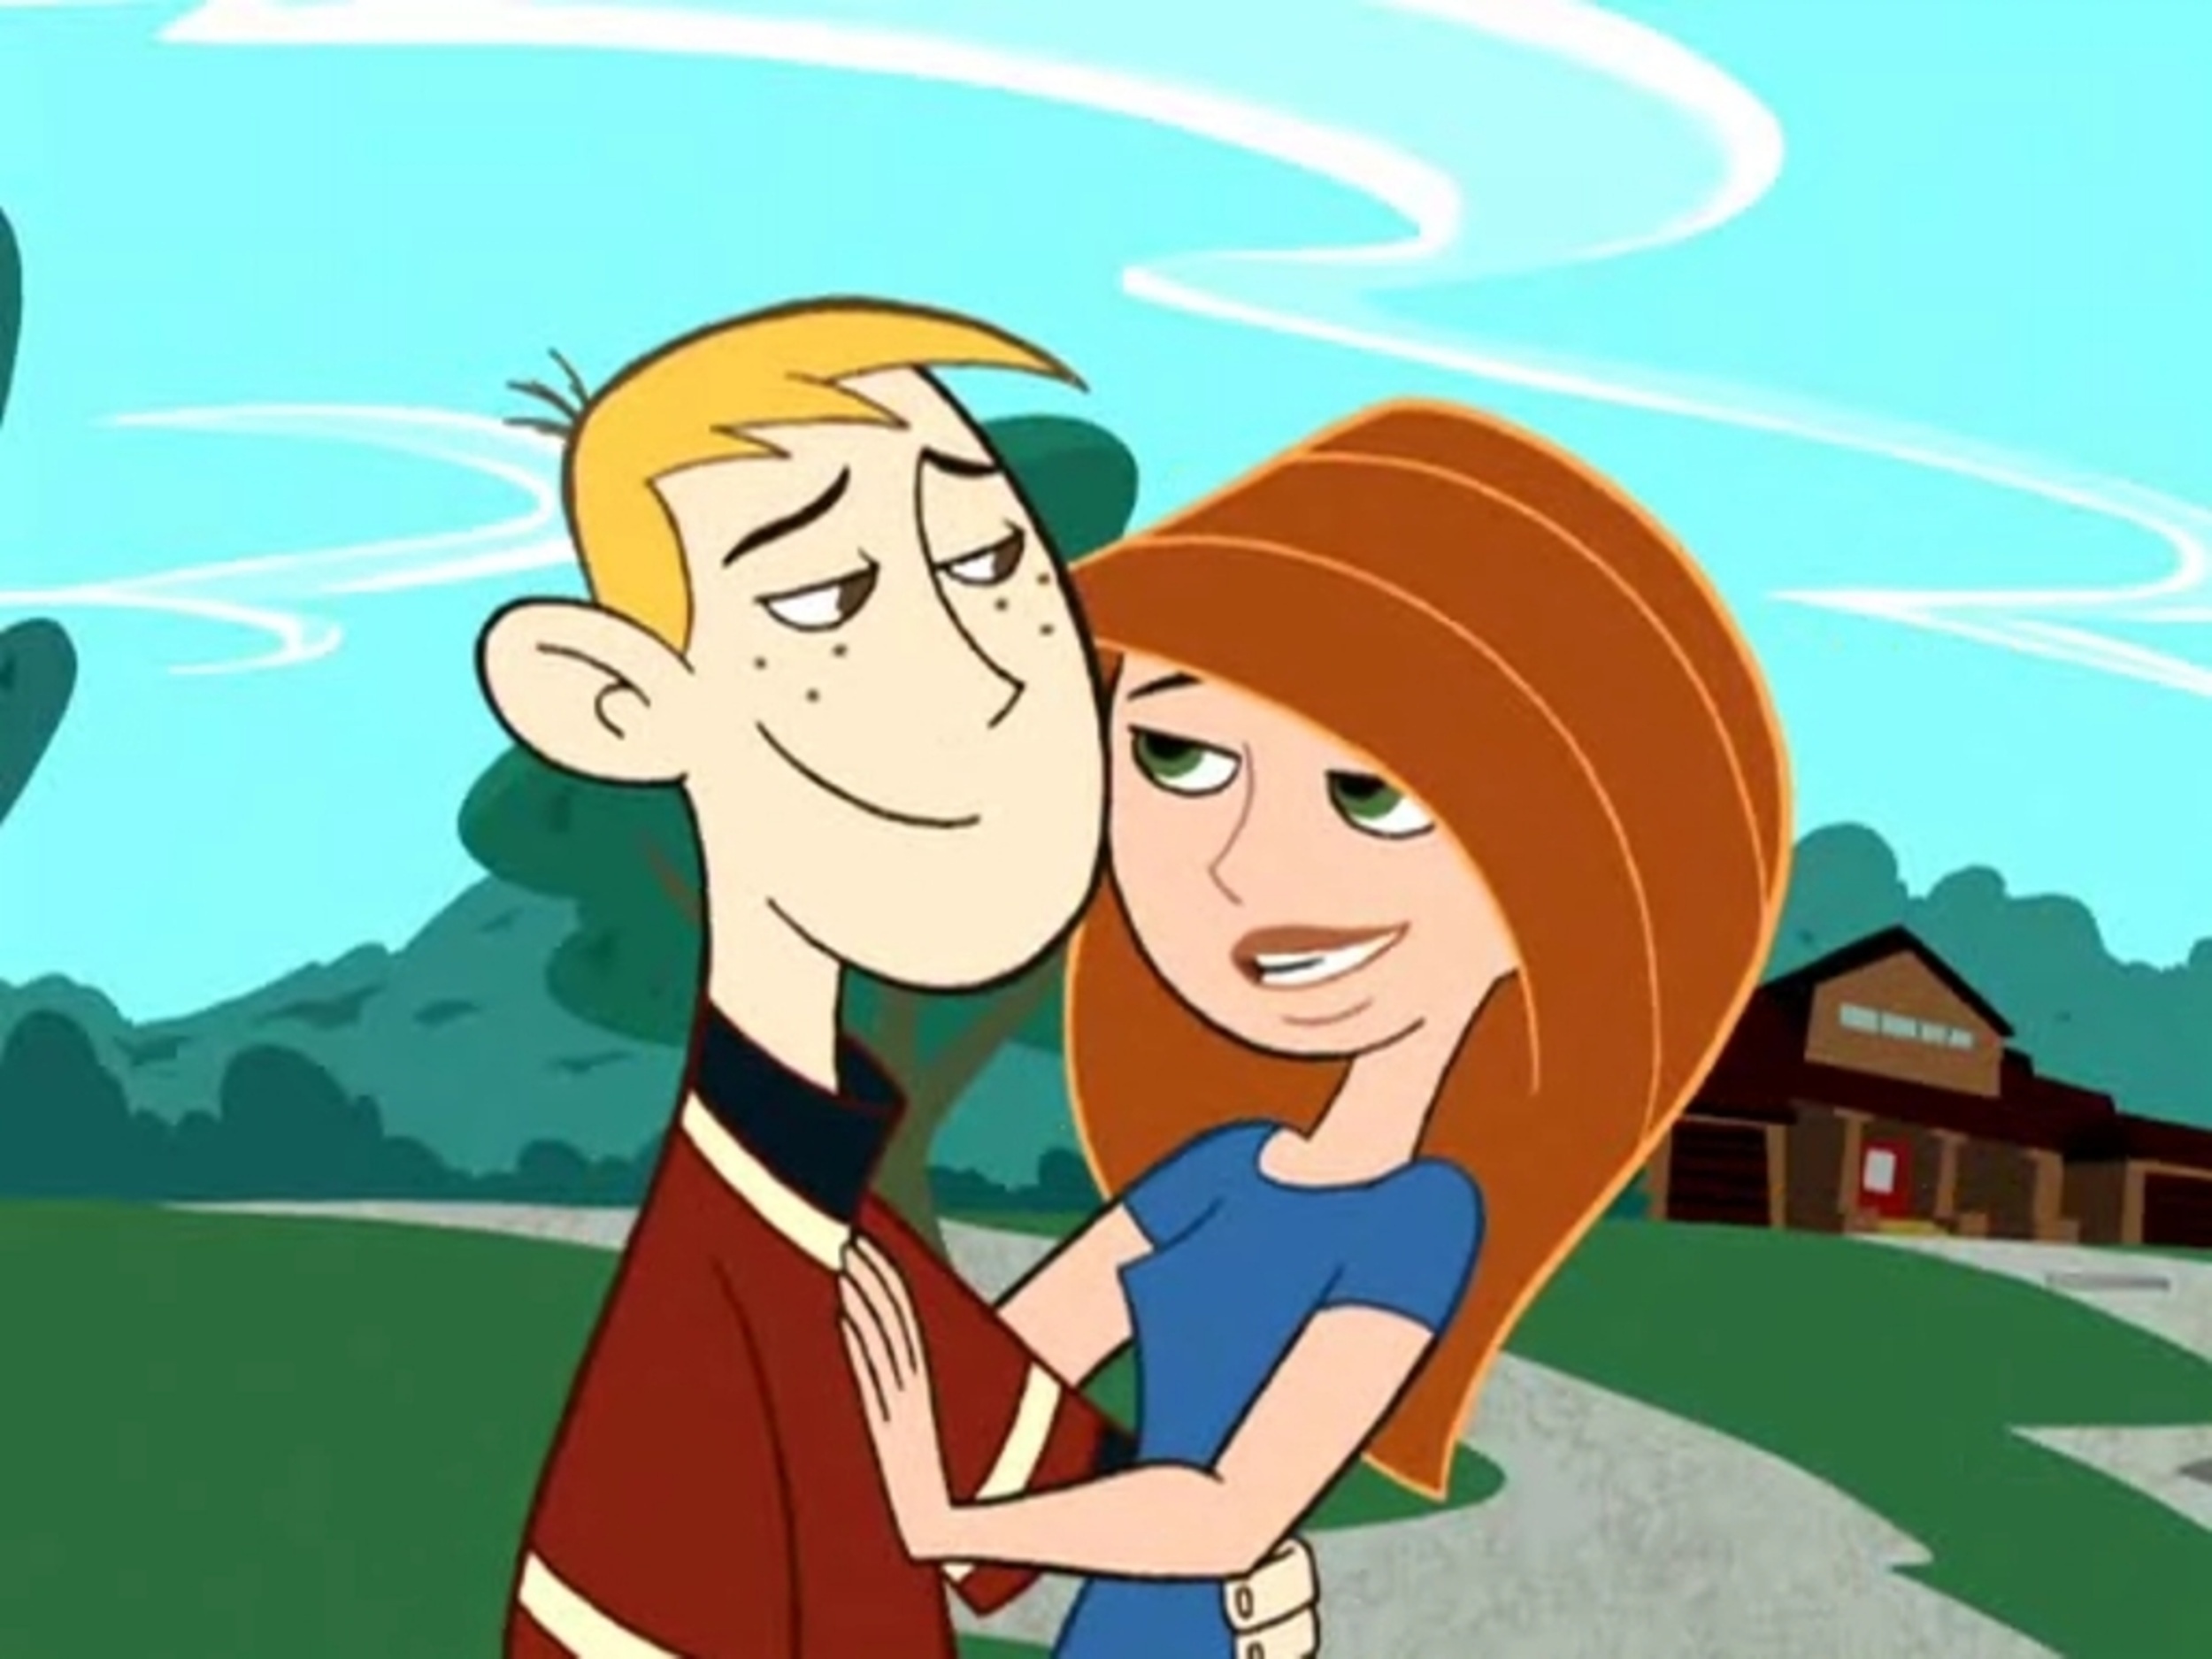 <p><span>Aside from a stellar theme song,<em> Kim Possible</em> also packed a punch by being a strong lead female character who held her own.</span></p><p><a href='https://www.msn.com/en-us/community/channel/vid-cj9pqbr0vn9in2b6ddcd8sfgpfq6x6utp44fssrv6mc2gtybw0us'>Follow us on MSN to see more of our exclusive entertainment content.</a></p>